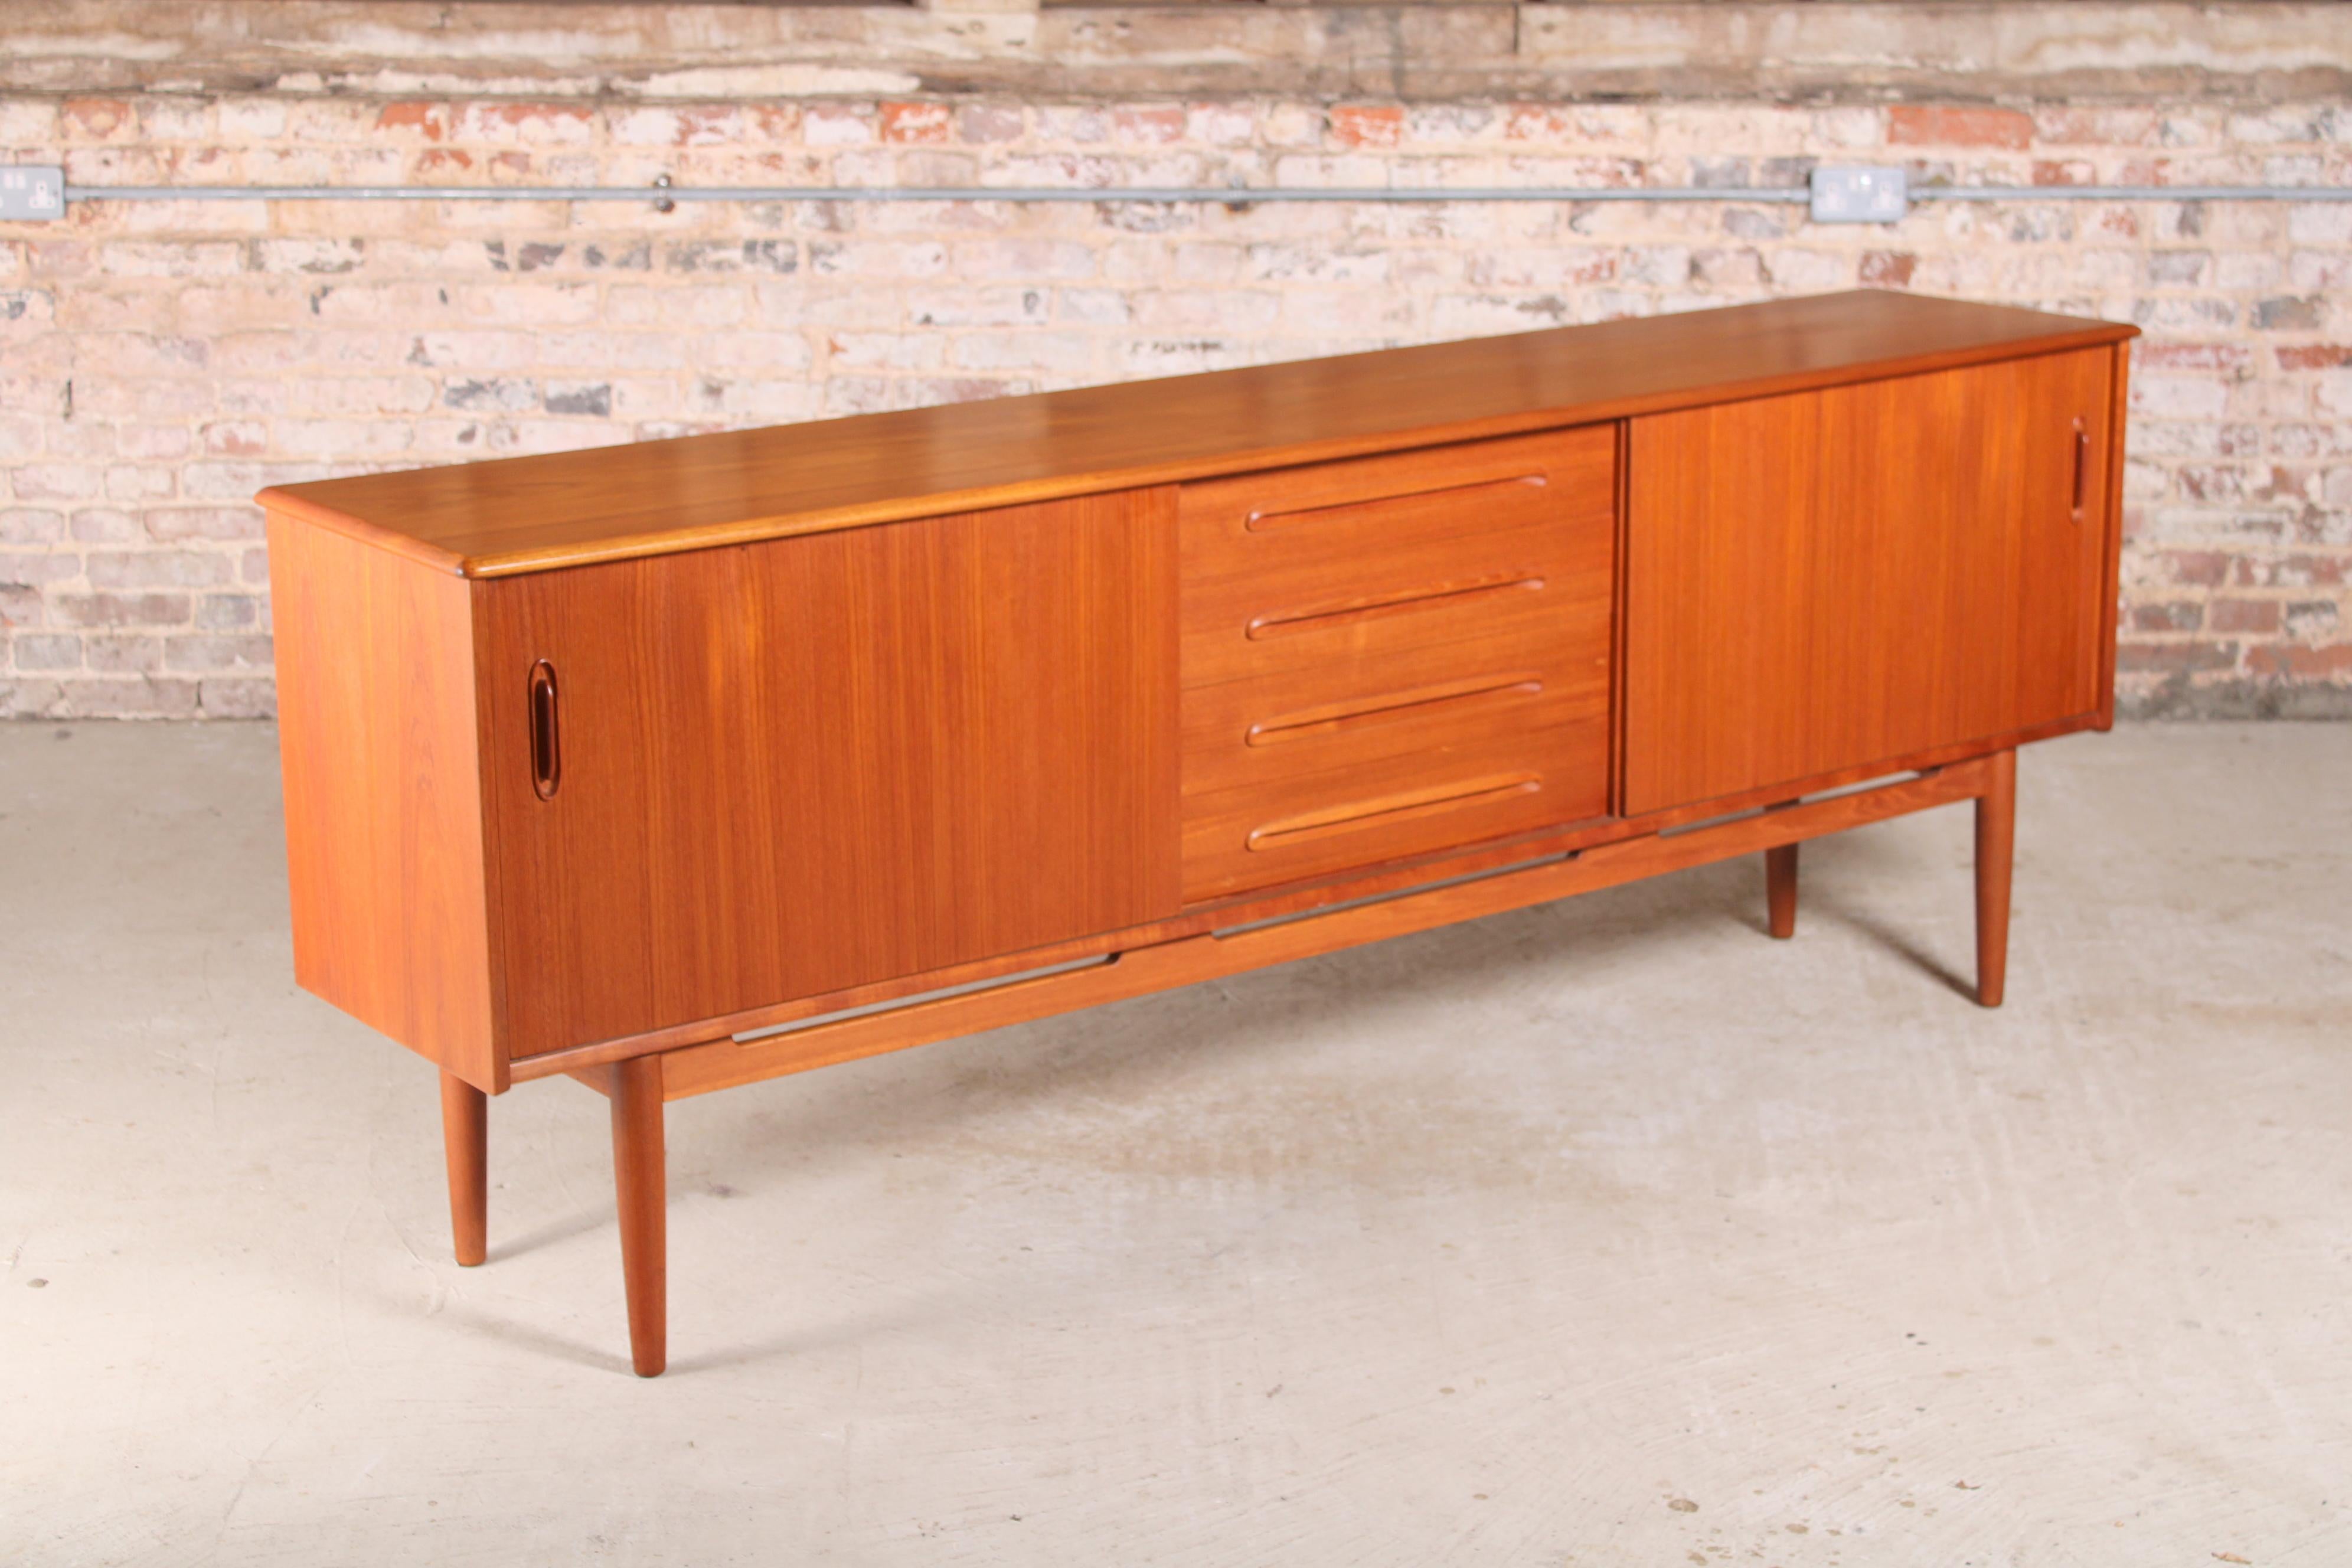 Mid-century teak sideboard by Nils Jonsson for Troeds, Sweden, circa 1960s. 2 cabinets with sliding doors and 4 drawers. Top drawer is a cutlery drawer with a removable tray

Dimensions: 222 W x 45.5 D x 79.5 H cm.